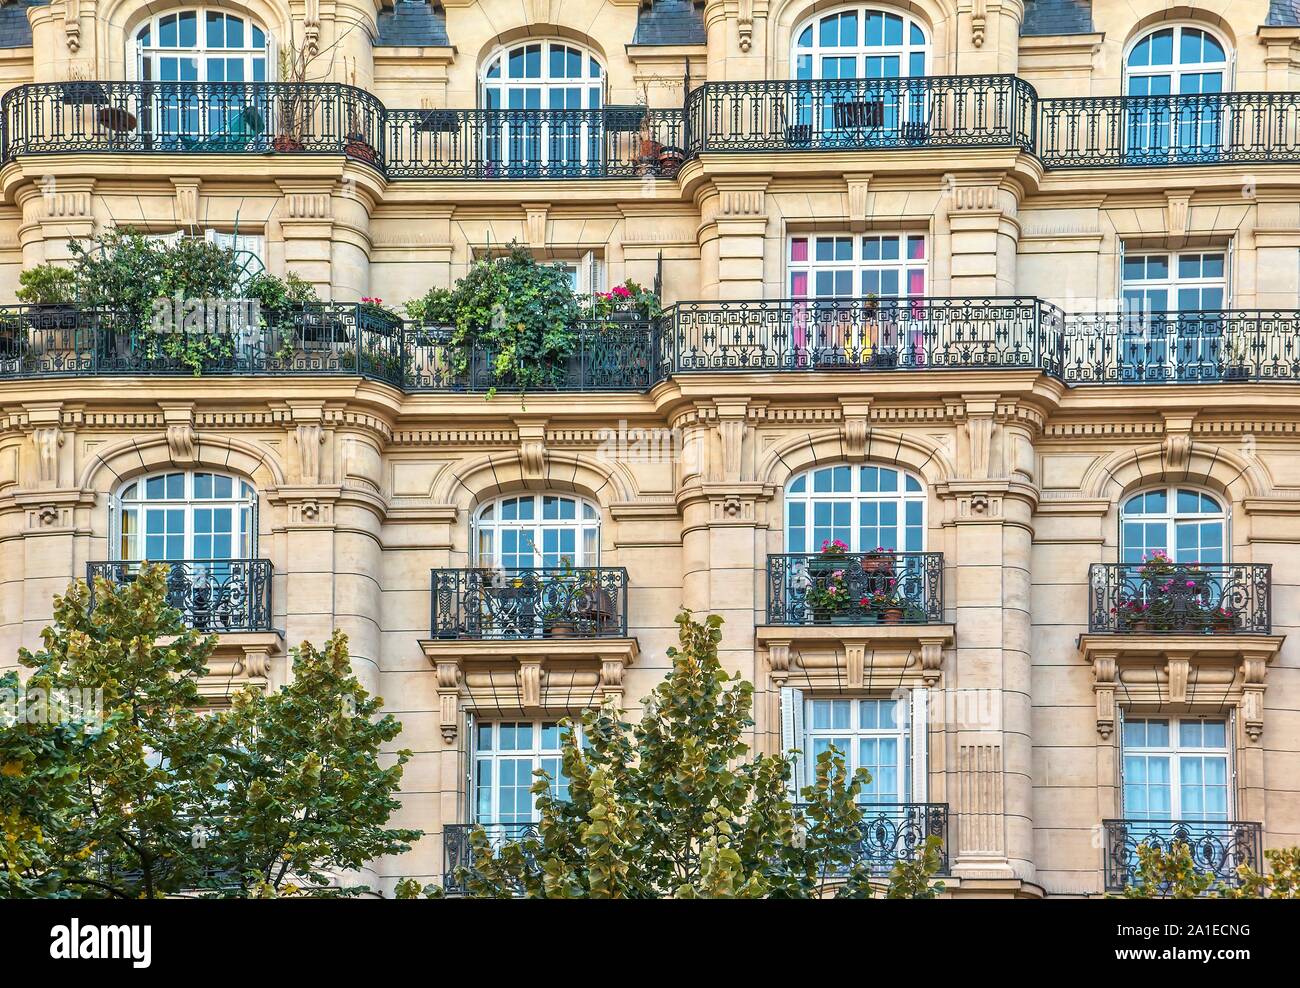 Street view of an old, elegant residential building facade in Paris, with ornate details in the stone walls, and french windows. Stock Photo